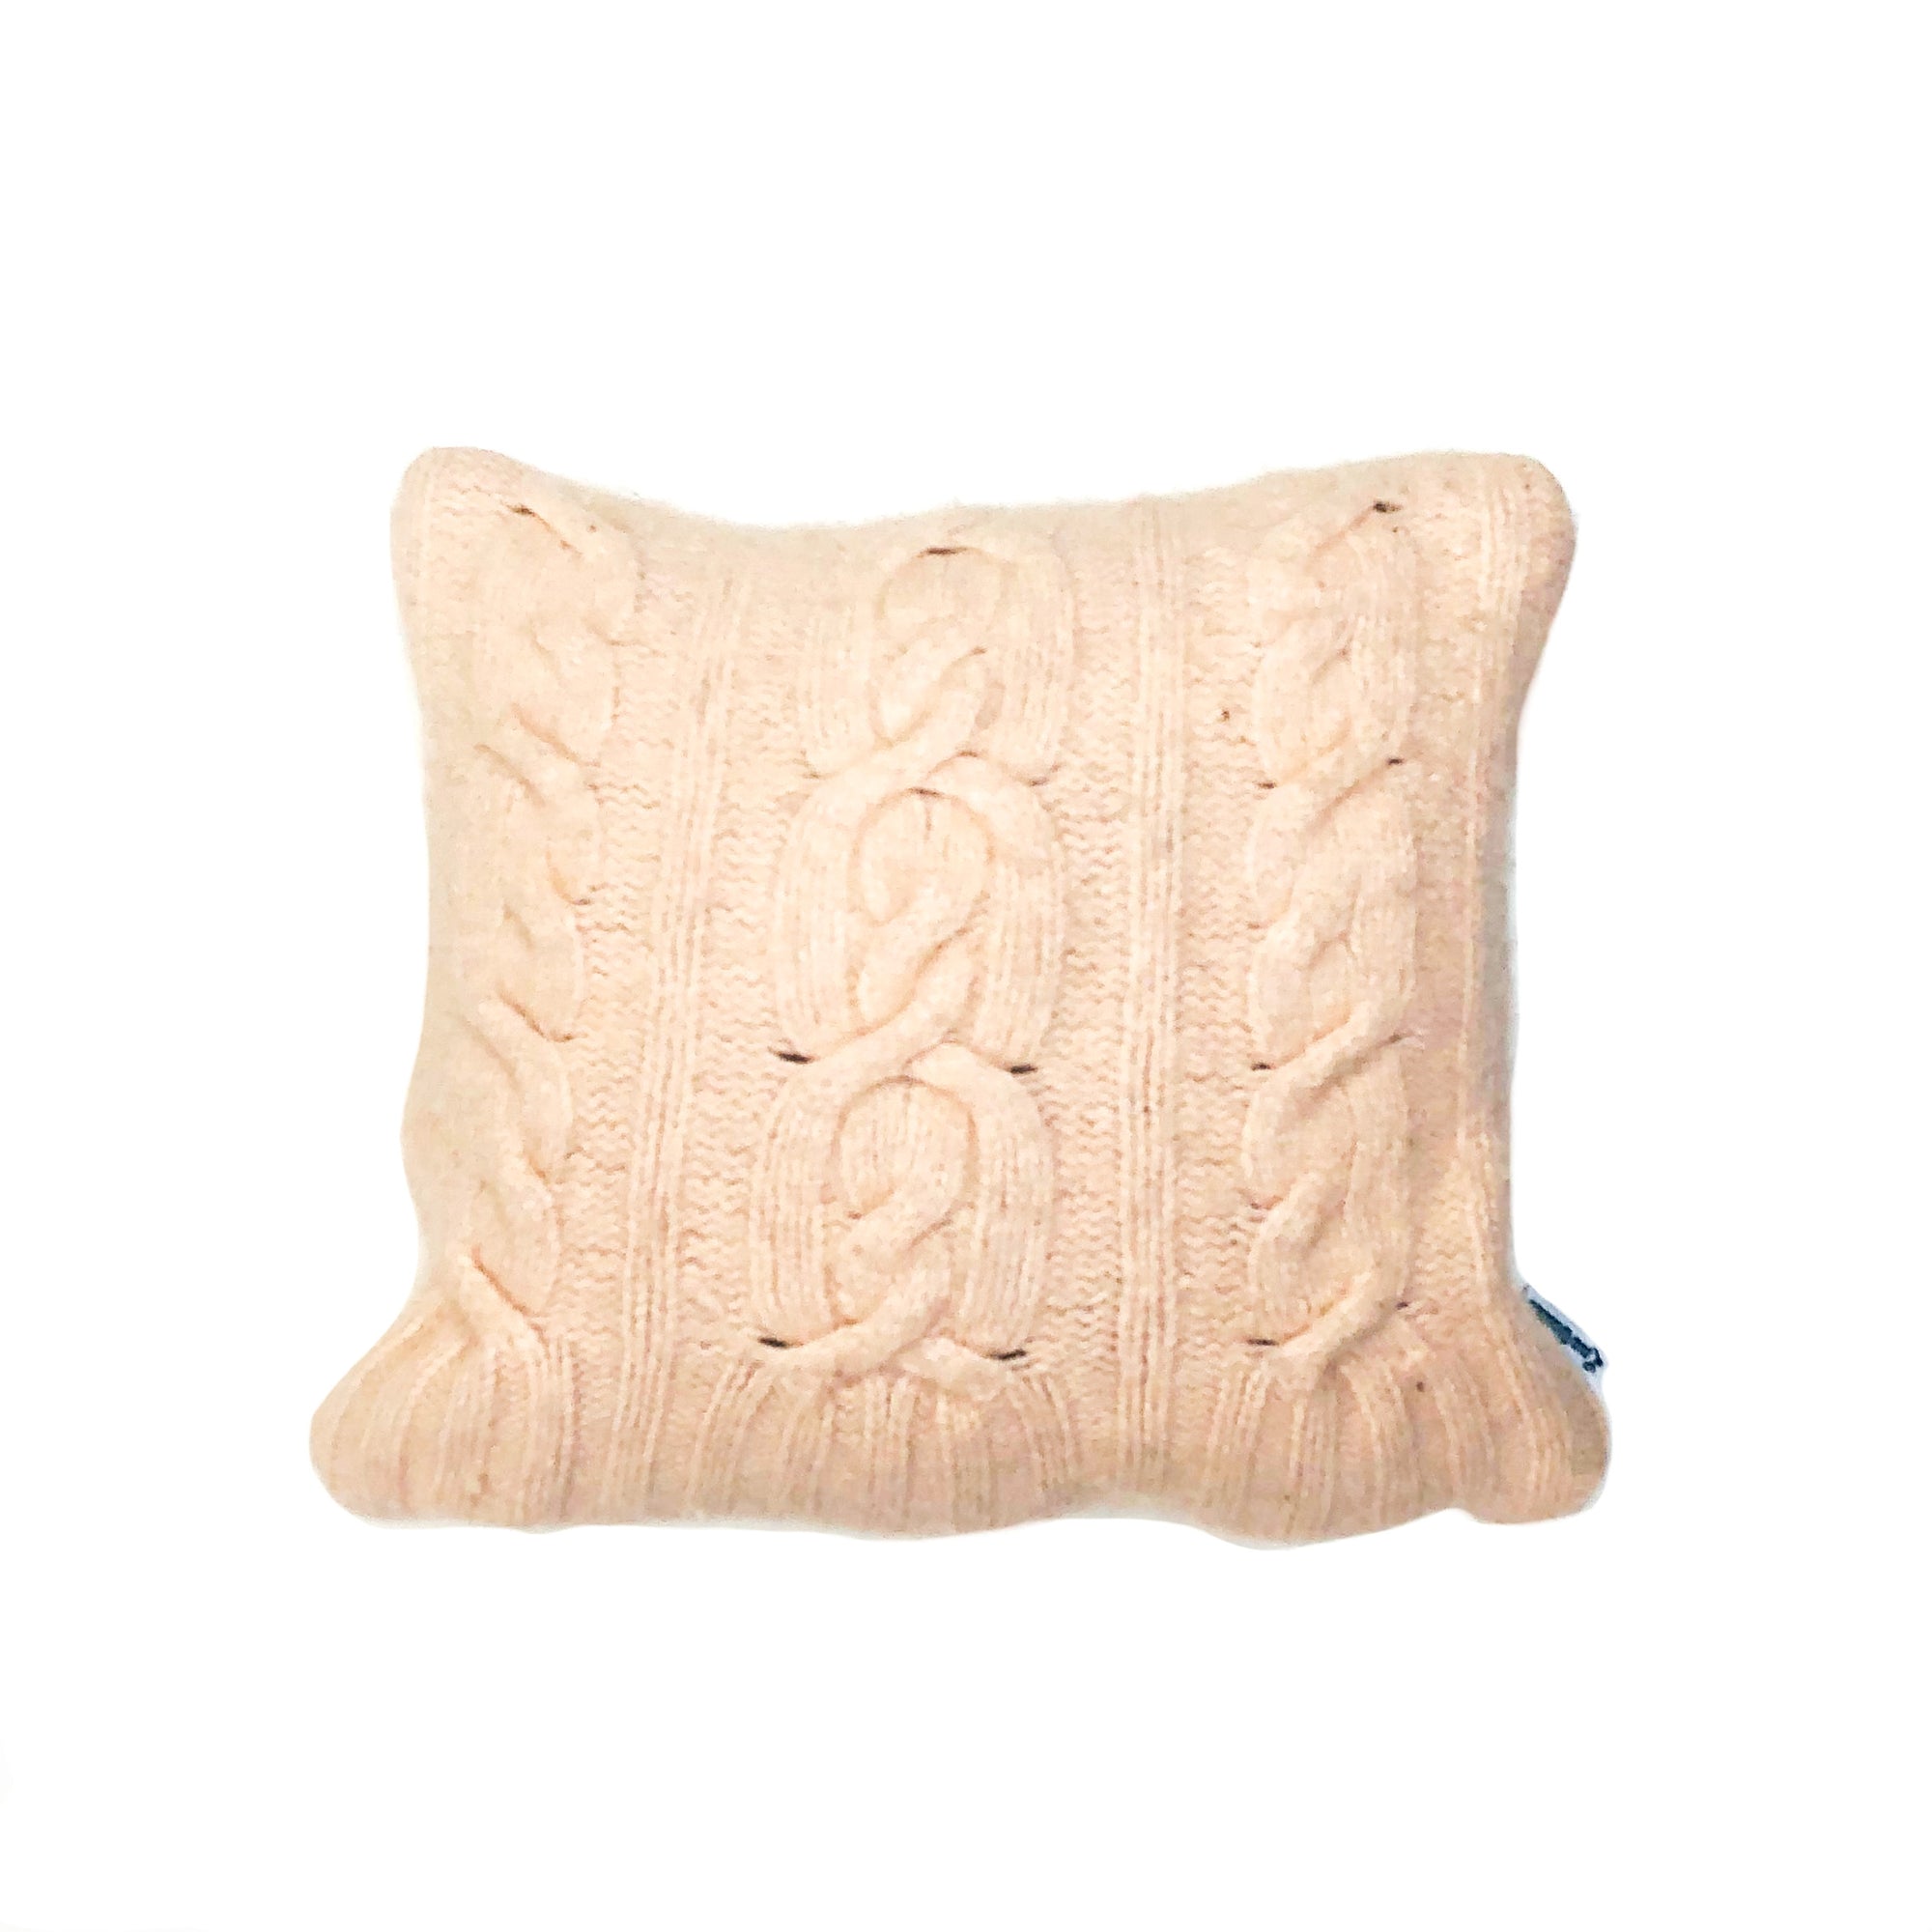 10x10 Pale Peach Cable Knit Pillow Cover